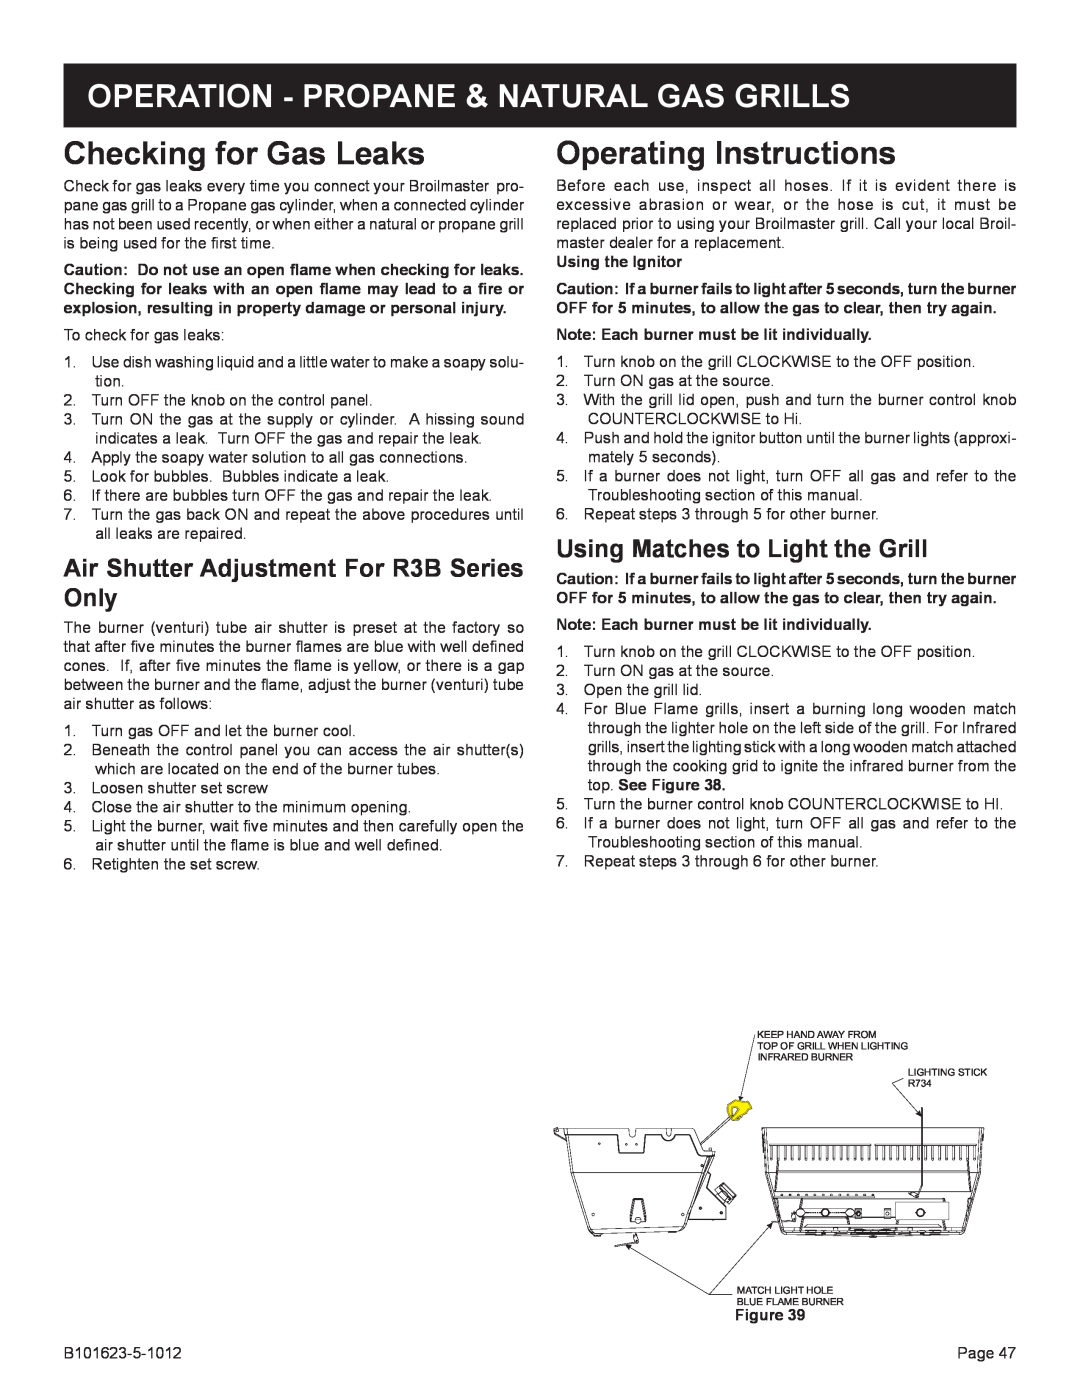 Broilmaster P4XFN-1, R3-1 manual Operation - Propane & Natural Gas Grills, Checking for Gas Leaks, Operating Instructions 